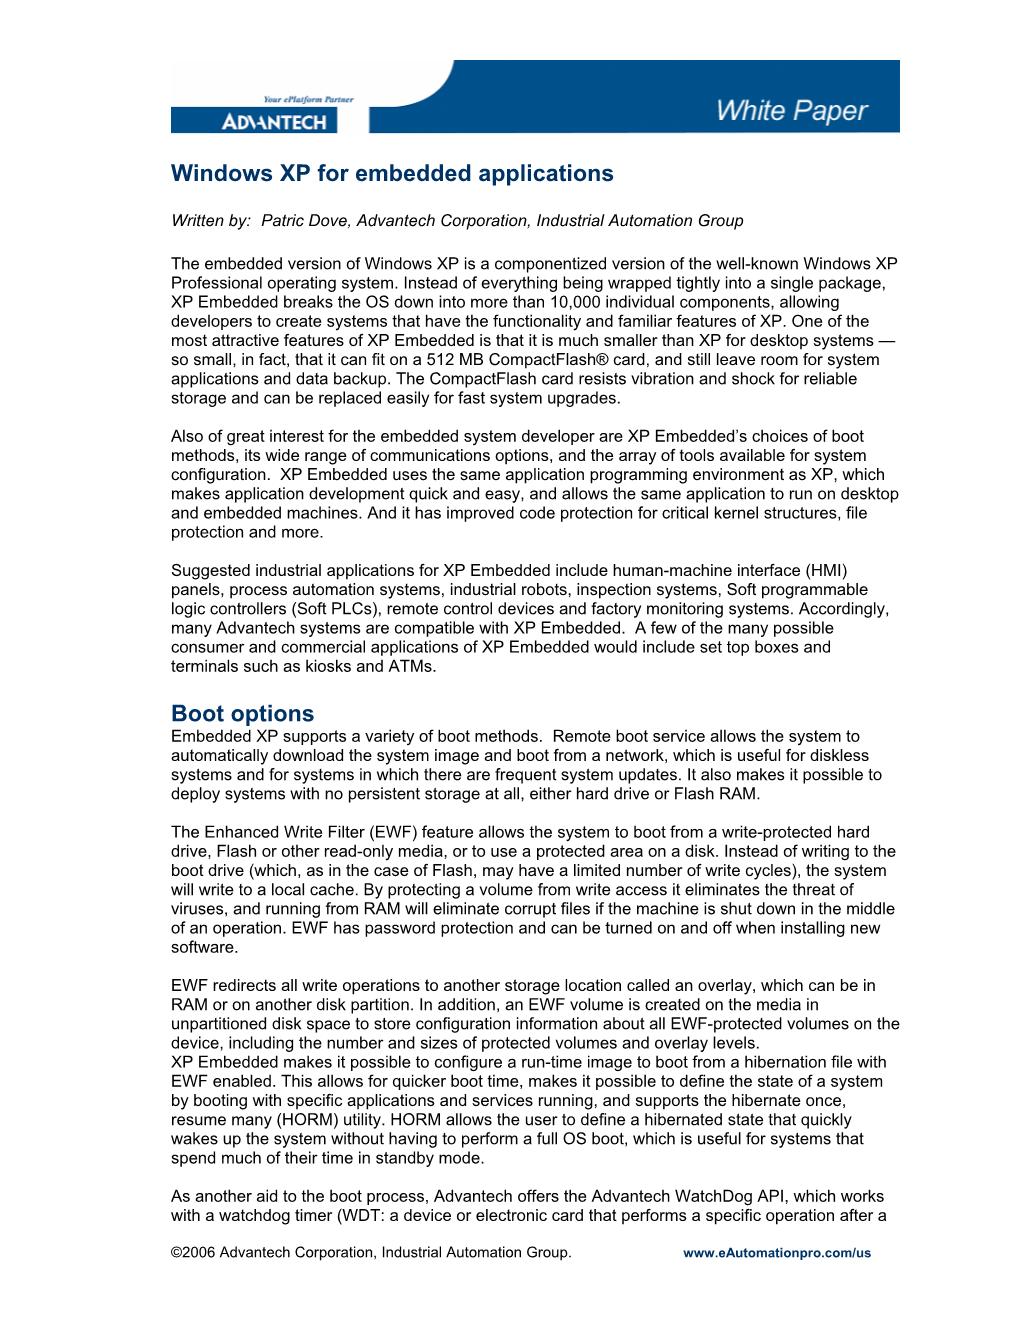 Windows XP for Embedded Applications